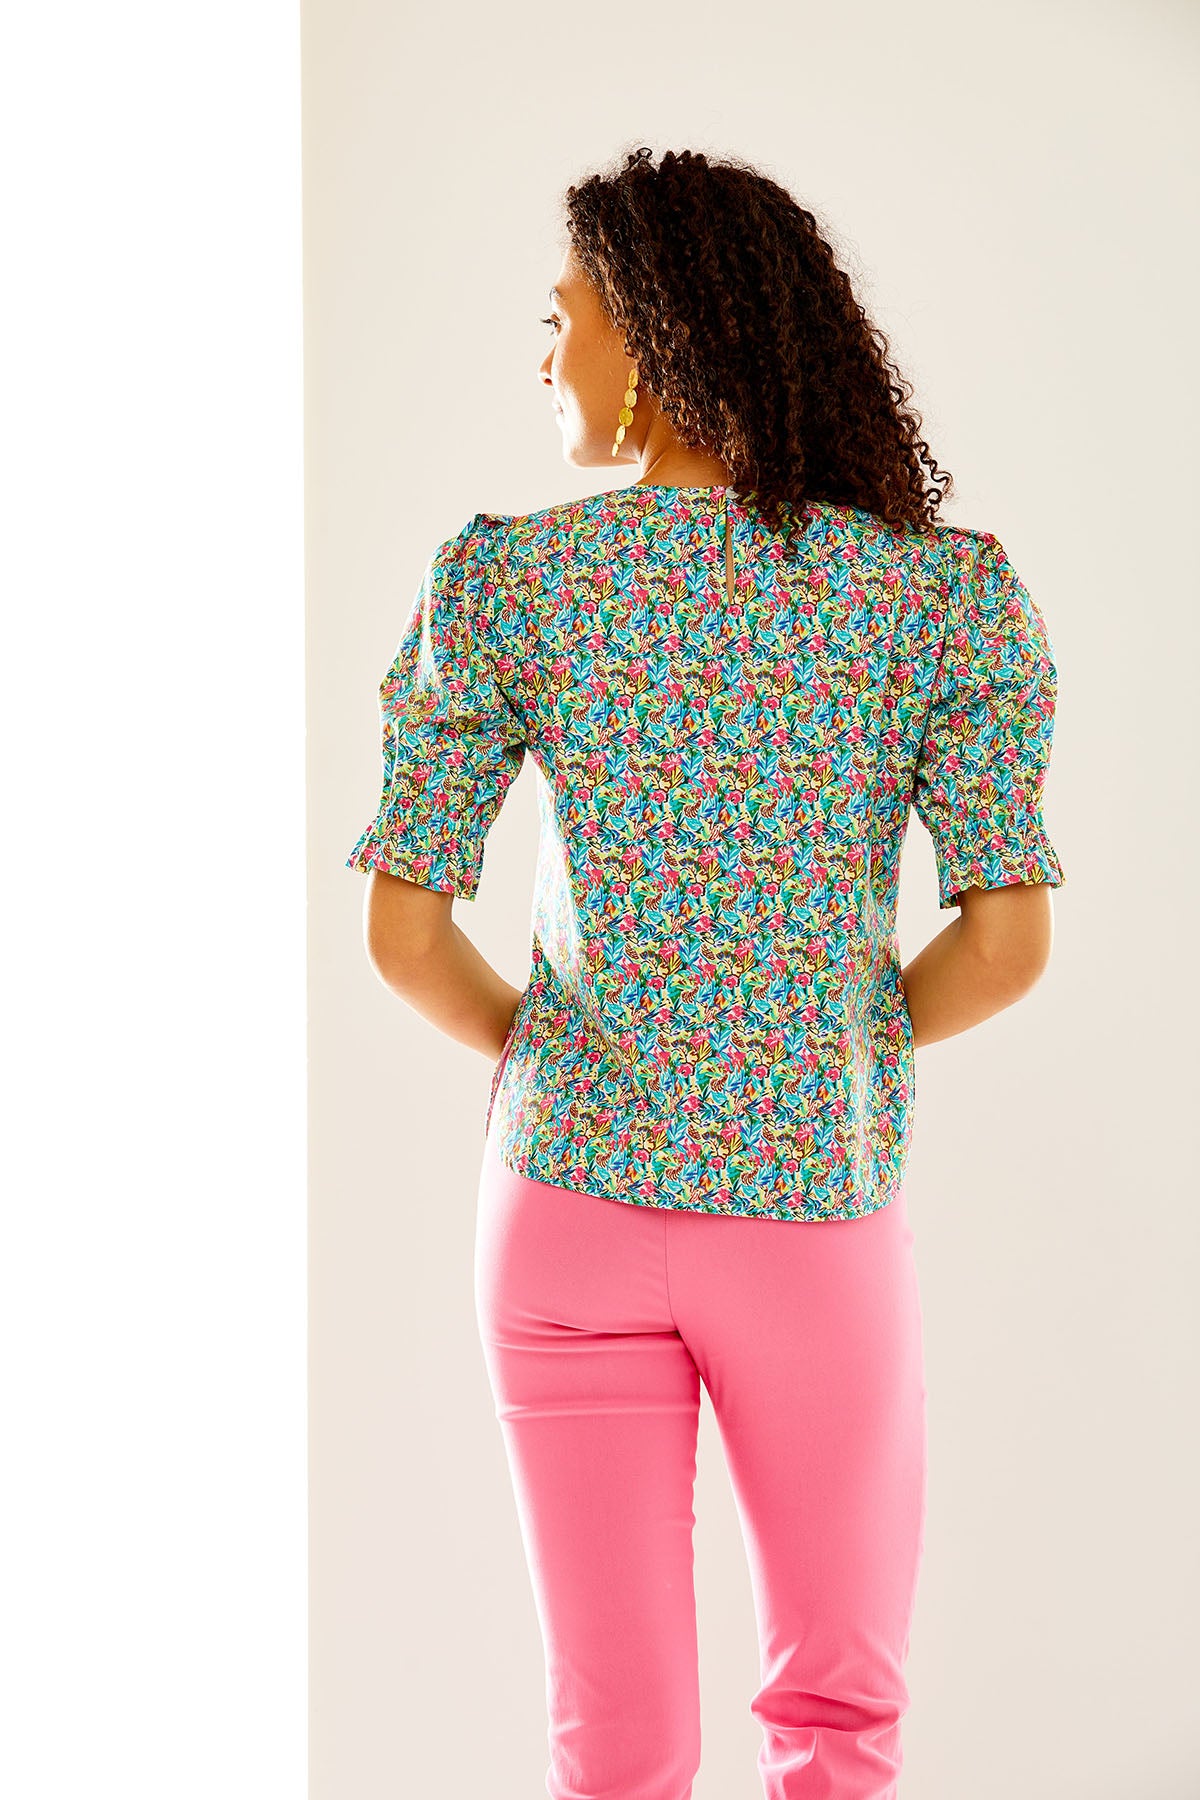 Woman in blossom print top